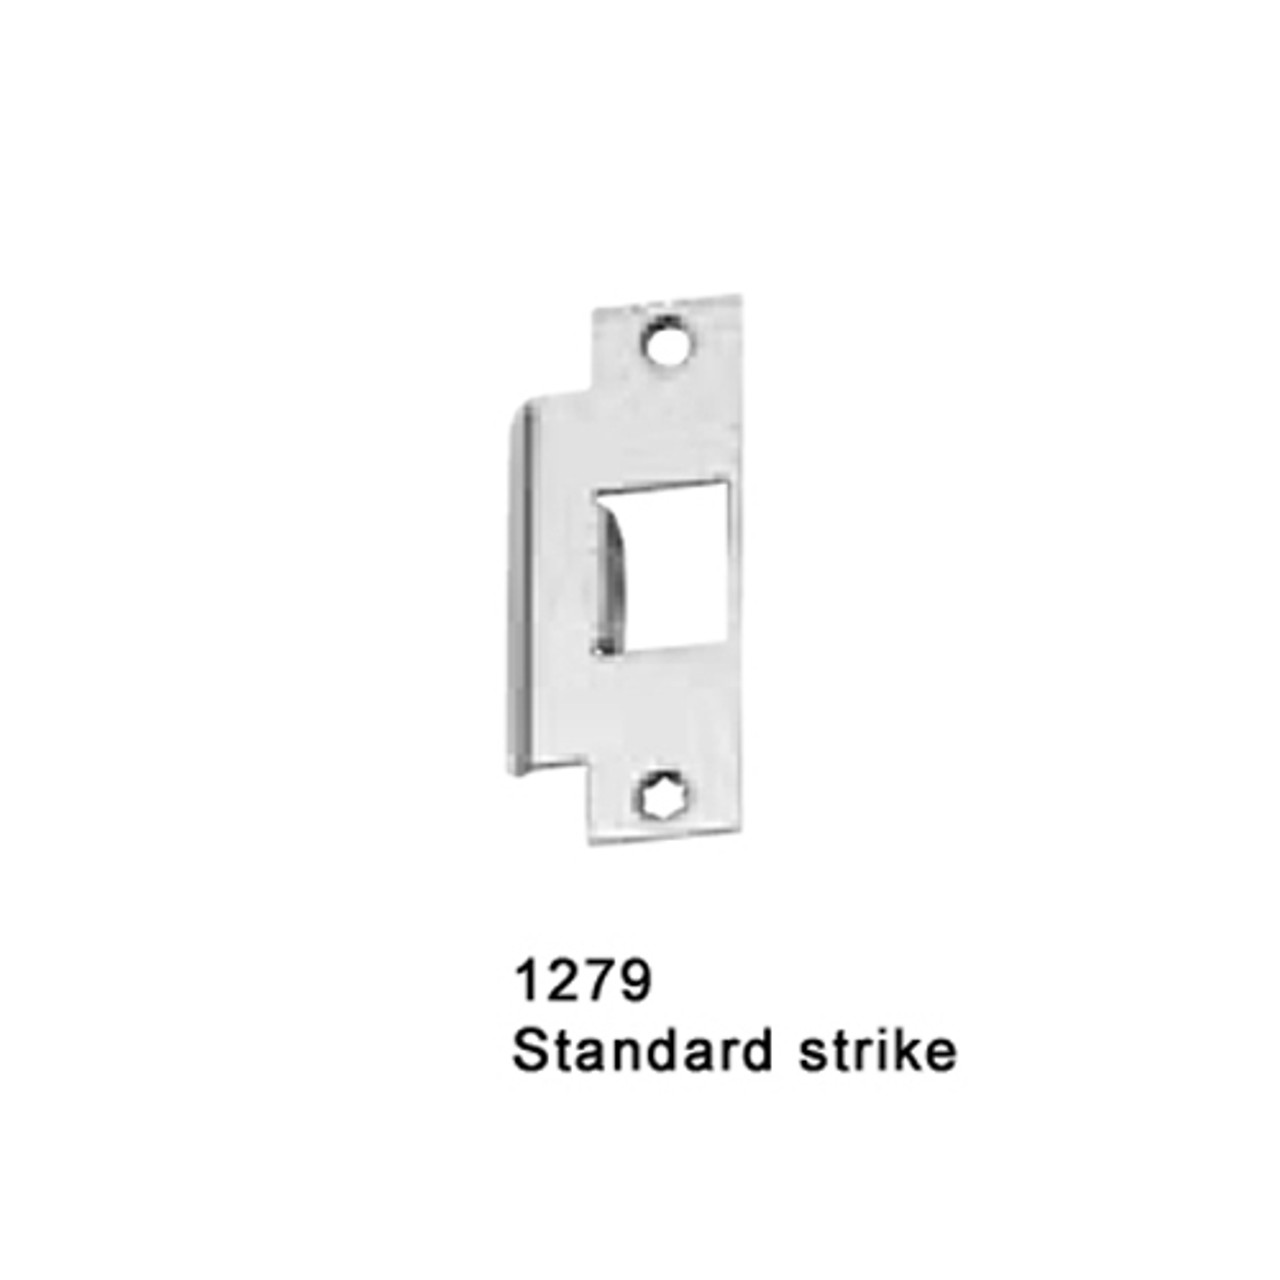 CD25-M-DT-US32-4-LHR Falcon 25 Series Mortise Lock Devices with 512DT Dummy Trim in Polished Stainless Steel